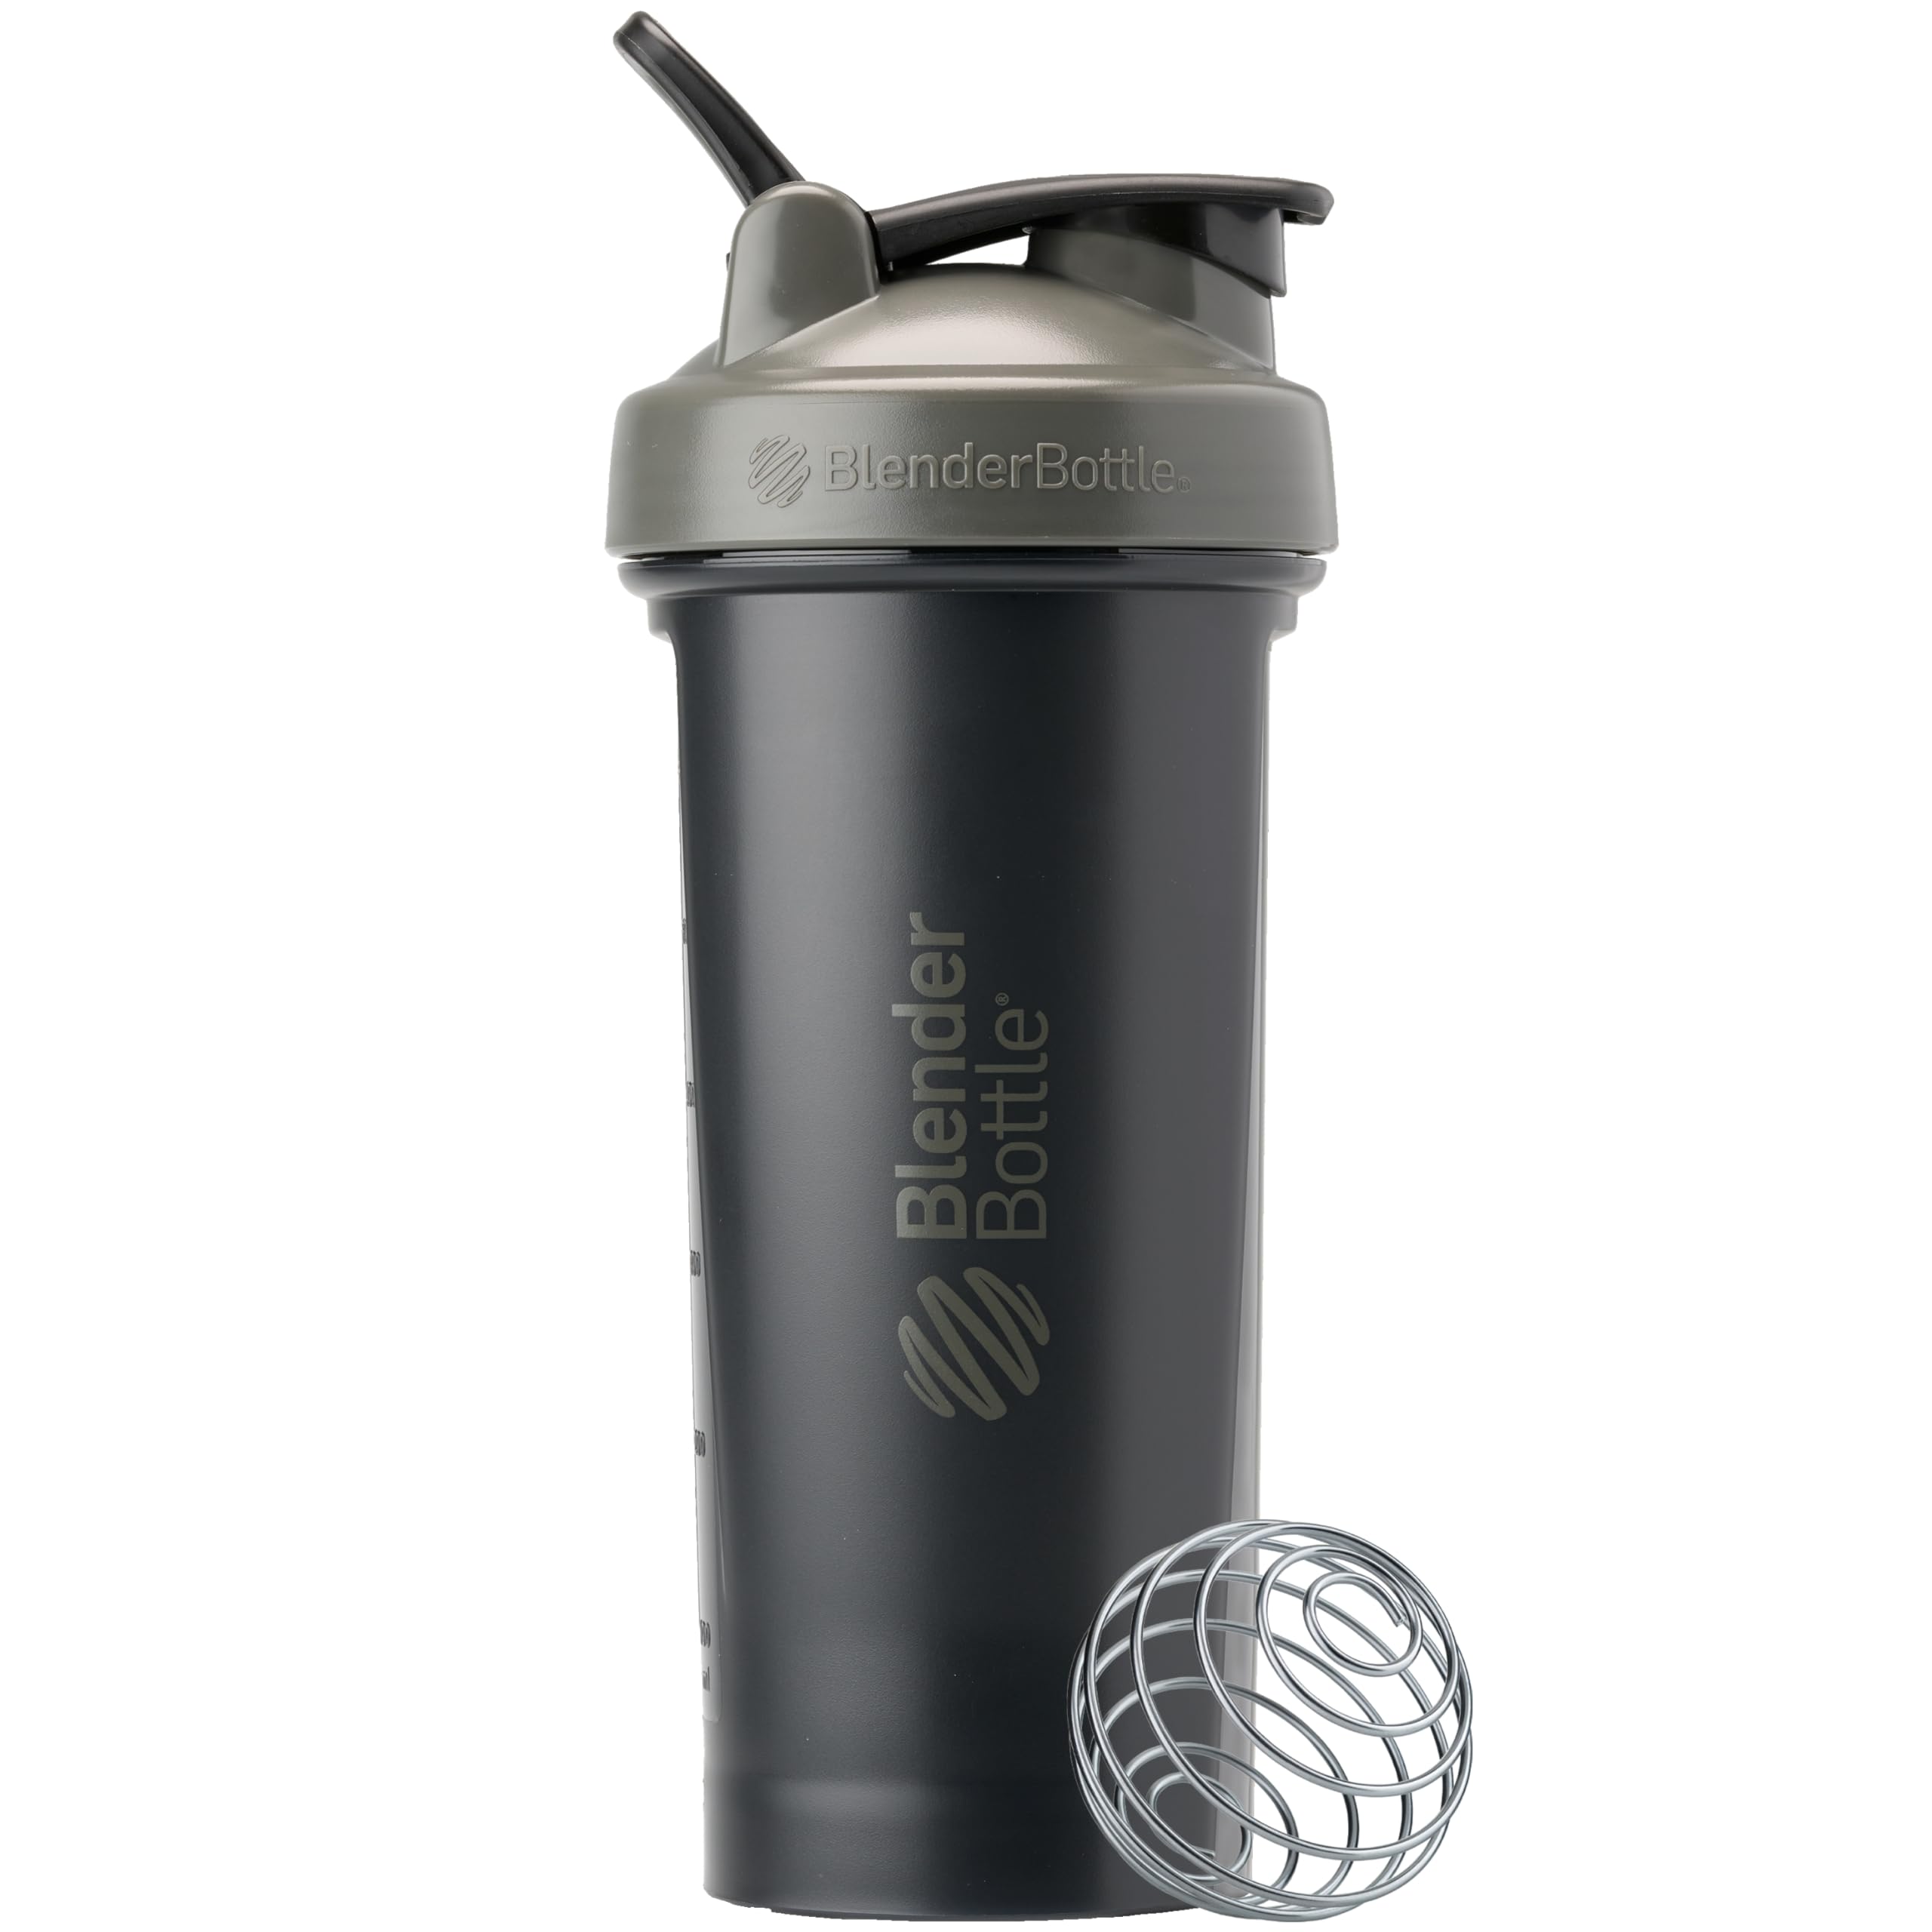 BlenderBottle Classic V2 Shaker Bottle Perfect for Protein Shakes and Pre Workout, 28-Ounce, Grey/Black, Black Shadow